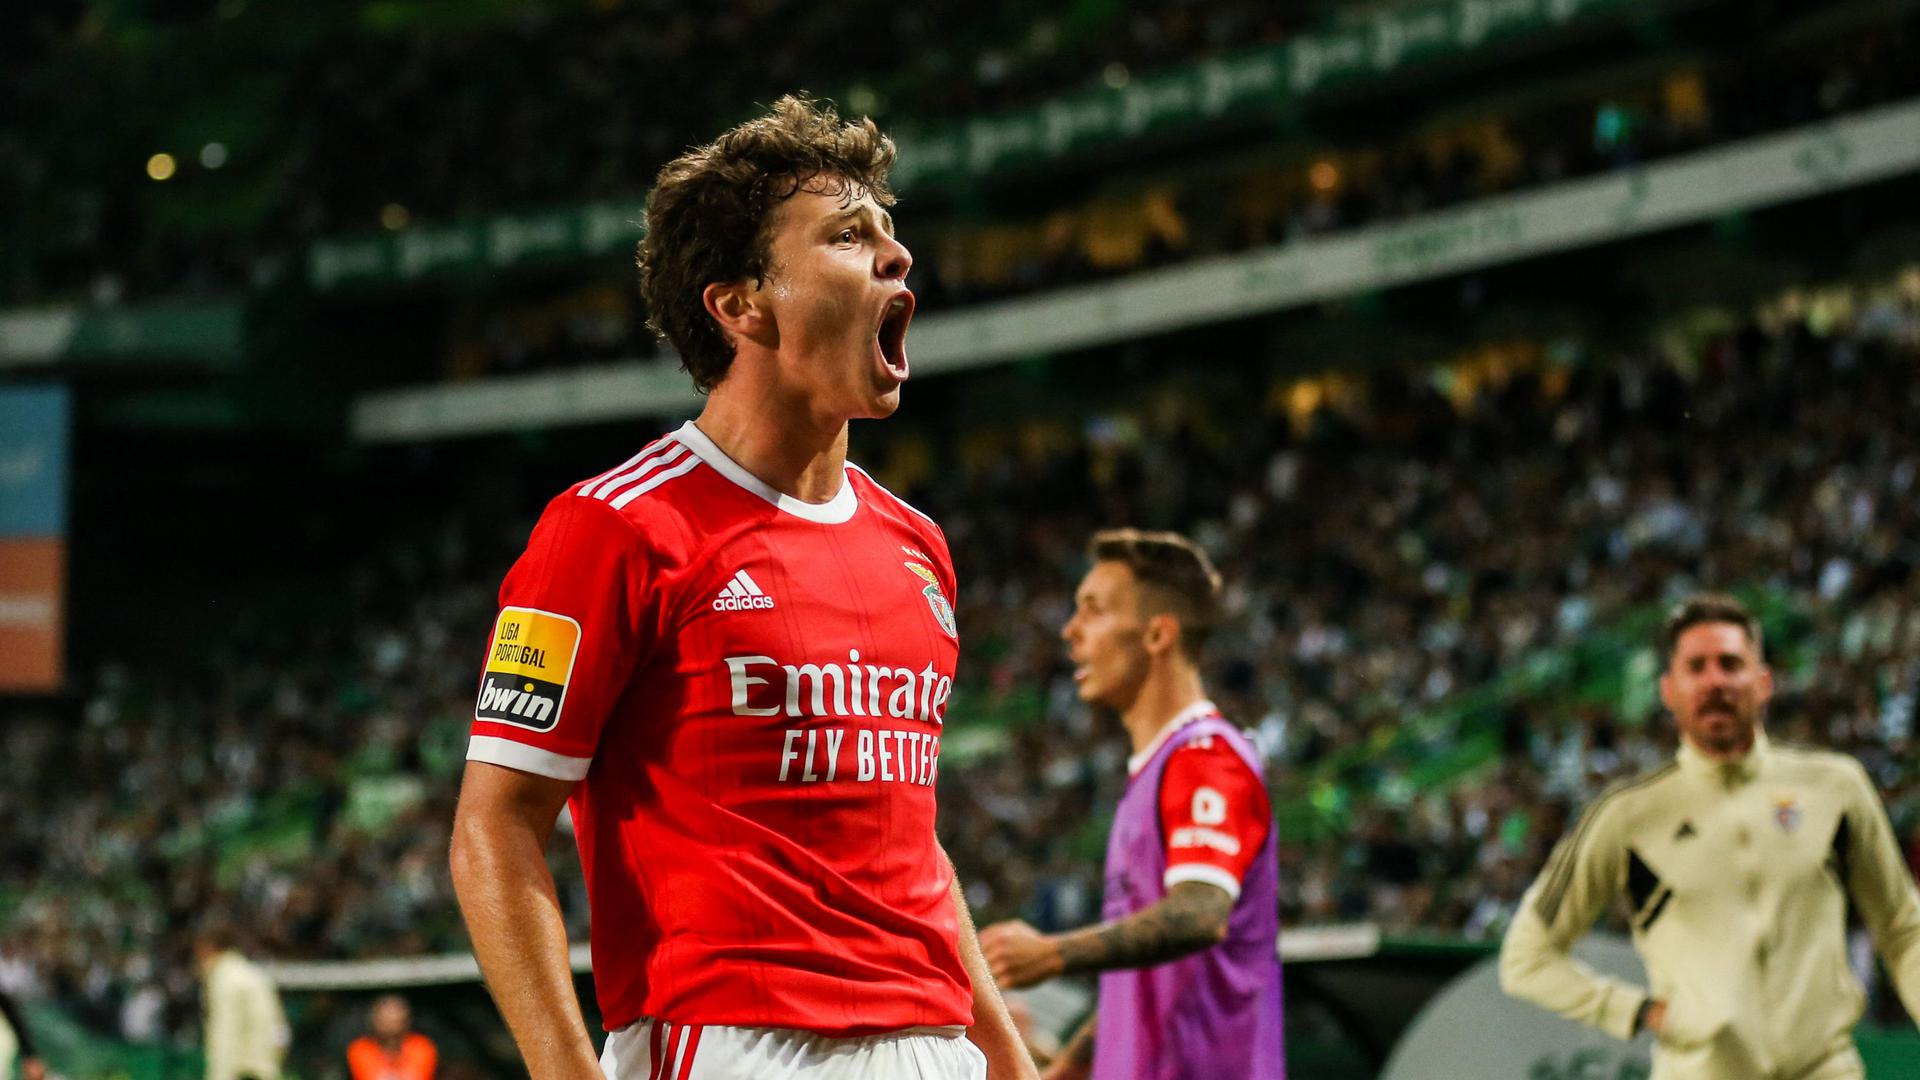 Benfica's Portuguese midfielder Joao Neves celebrates scoring the equalizing goal during the Portuguese league football match between Sporting CP and SL Benfica at the Jose Alvalade stadium in Lisbon on May 21, 2023. (Photo by CARLOS COSTA / AFP)